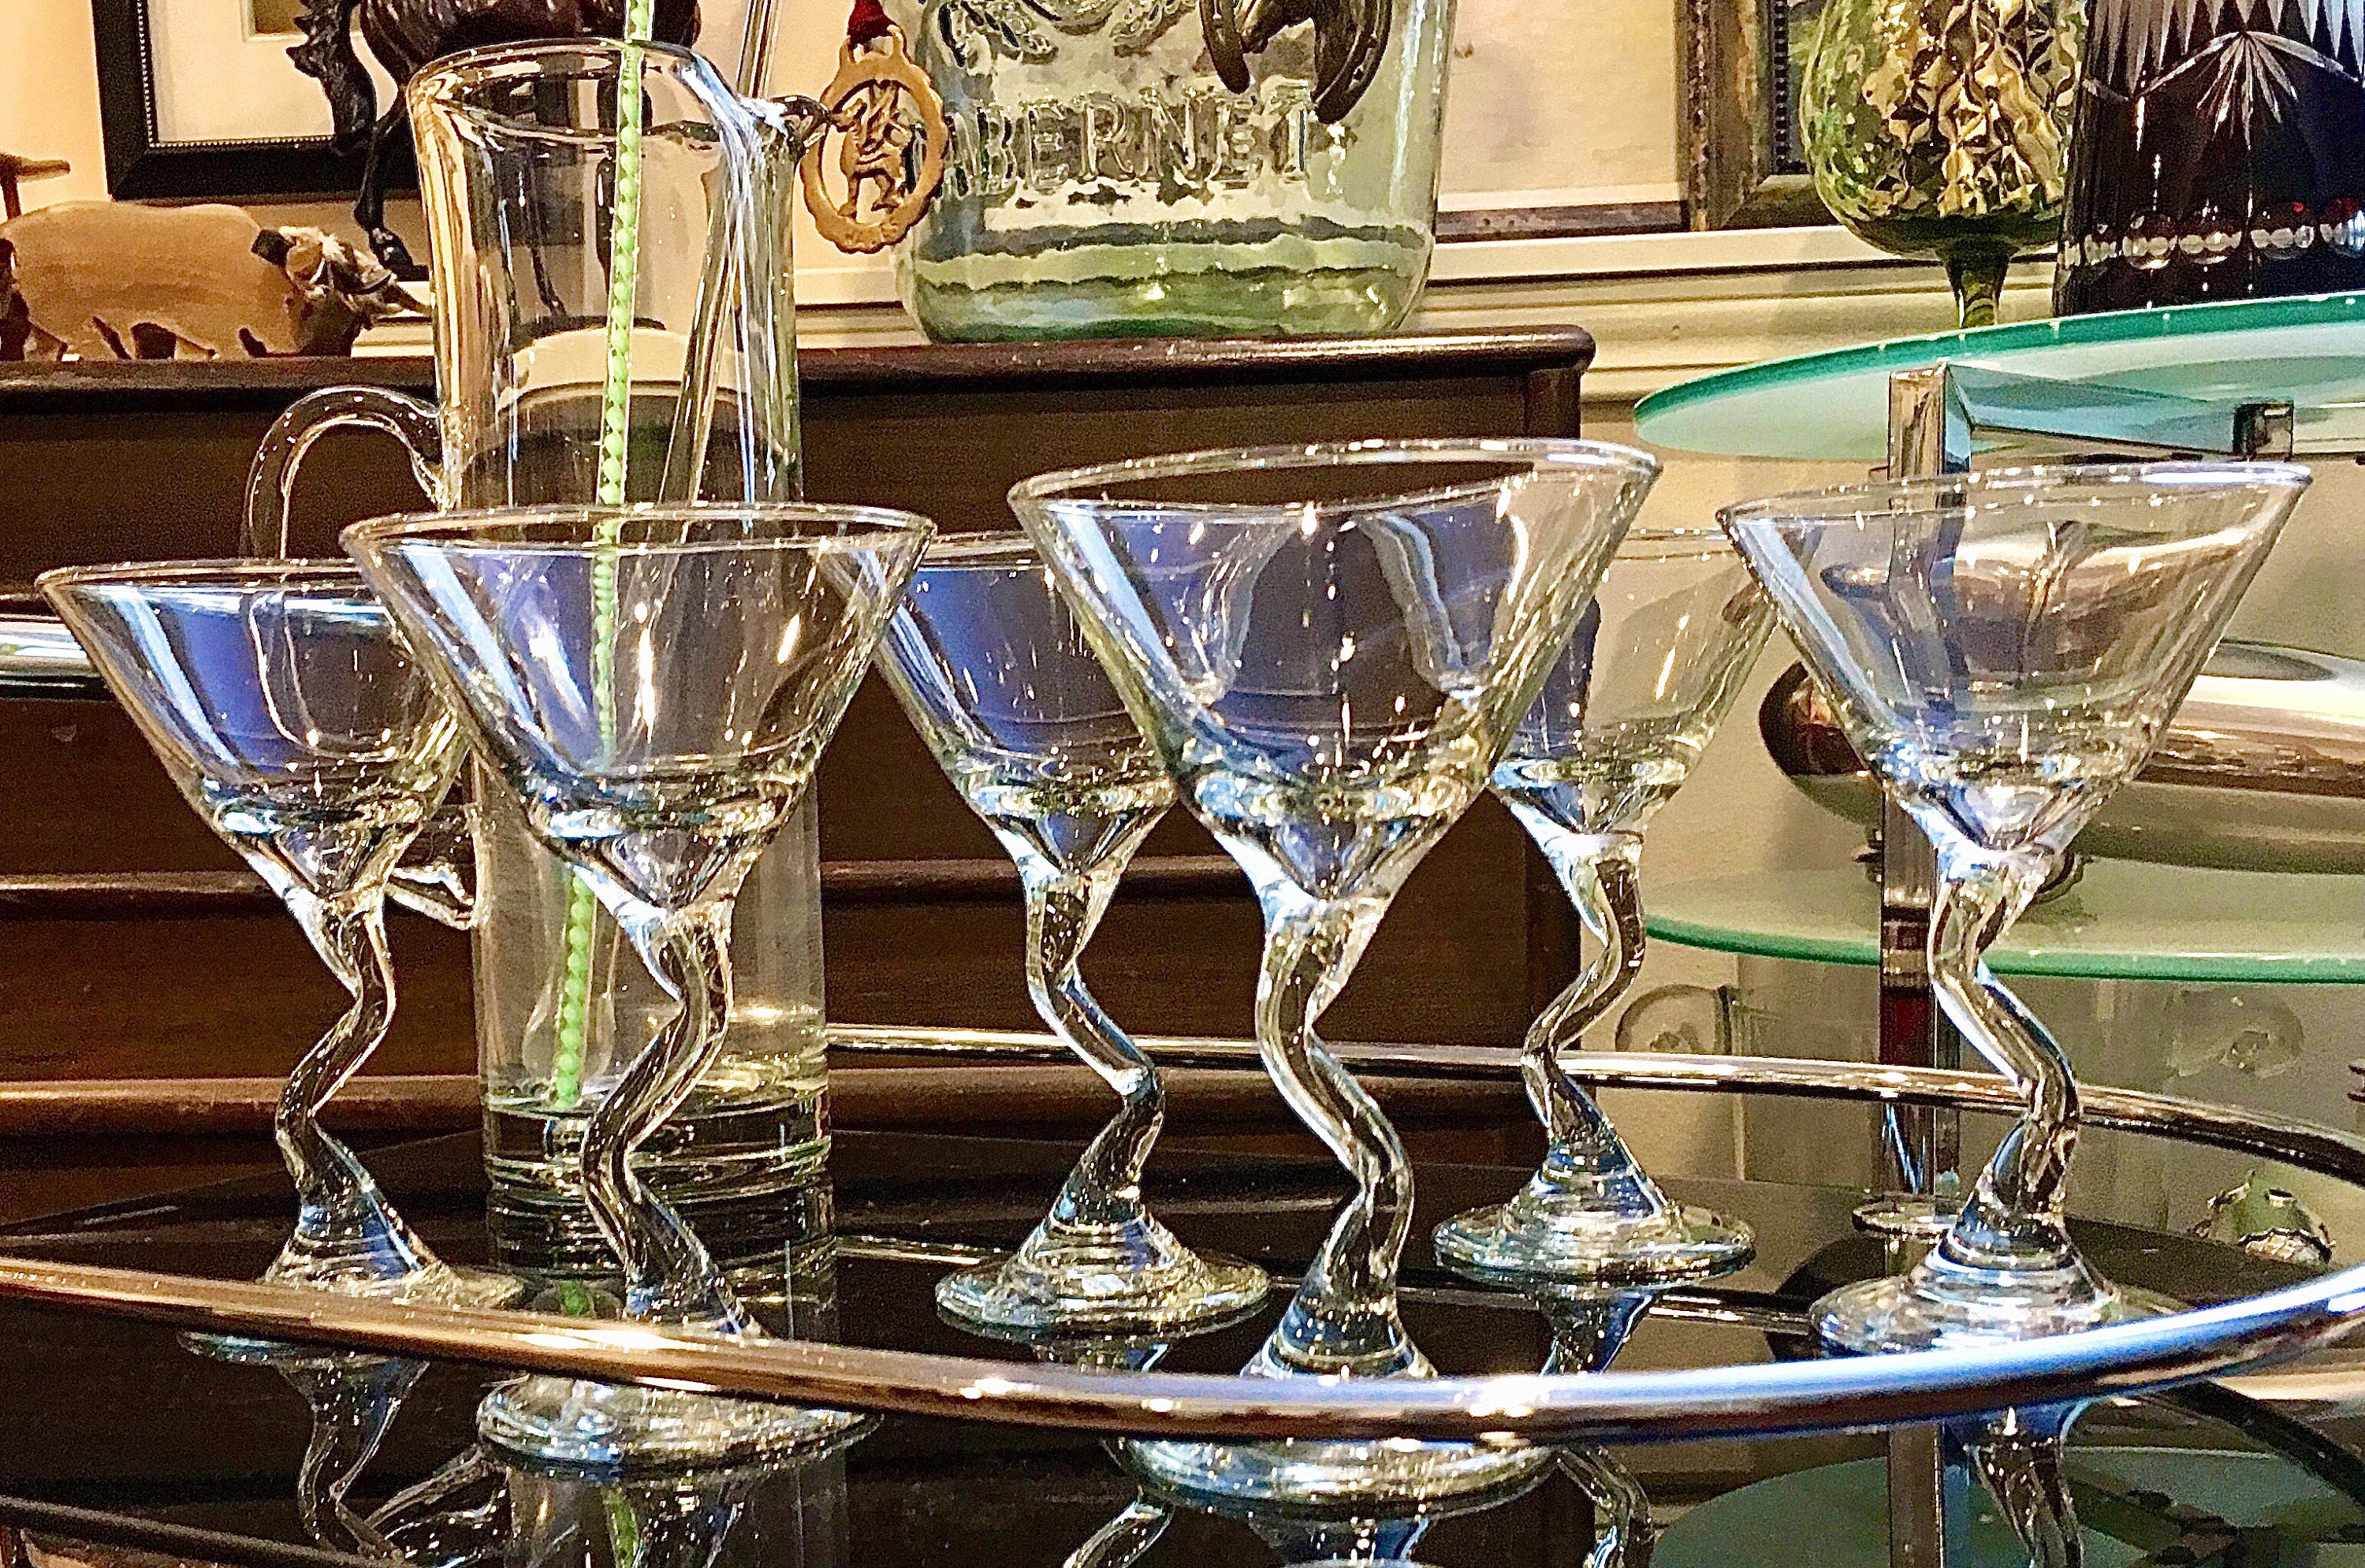 Set of Four Large Martini Cocktail Glass, Glasses For Martini Drinkers,  Large Bar Cart Glasses with Slender Stem, Gift For Groomsman